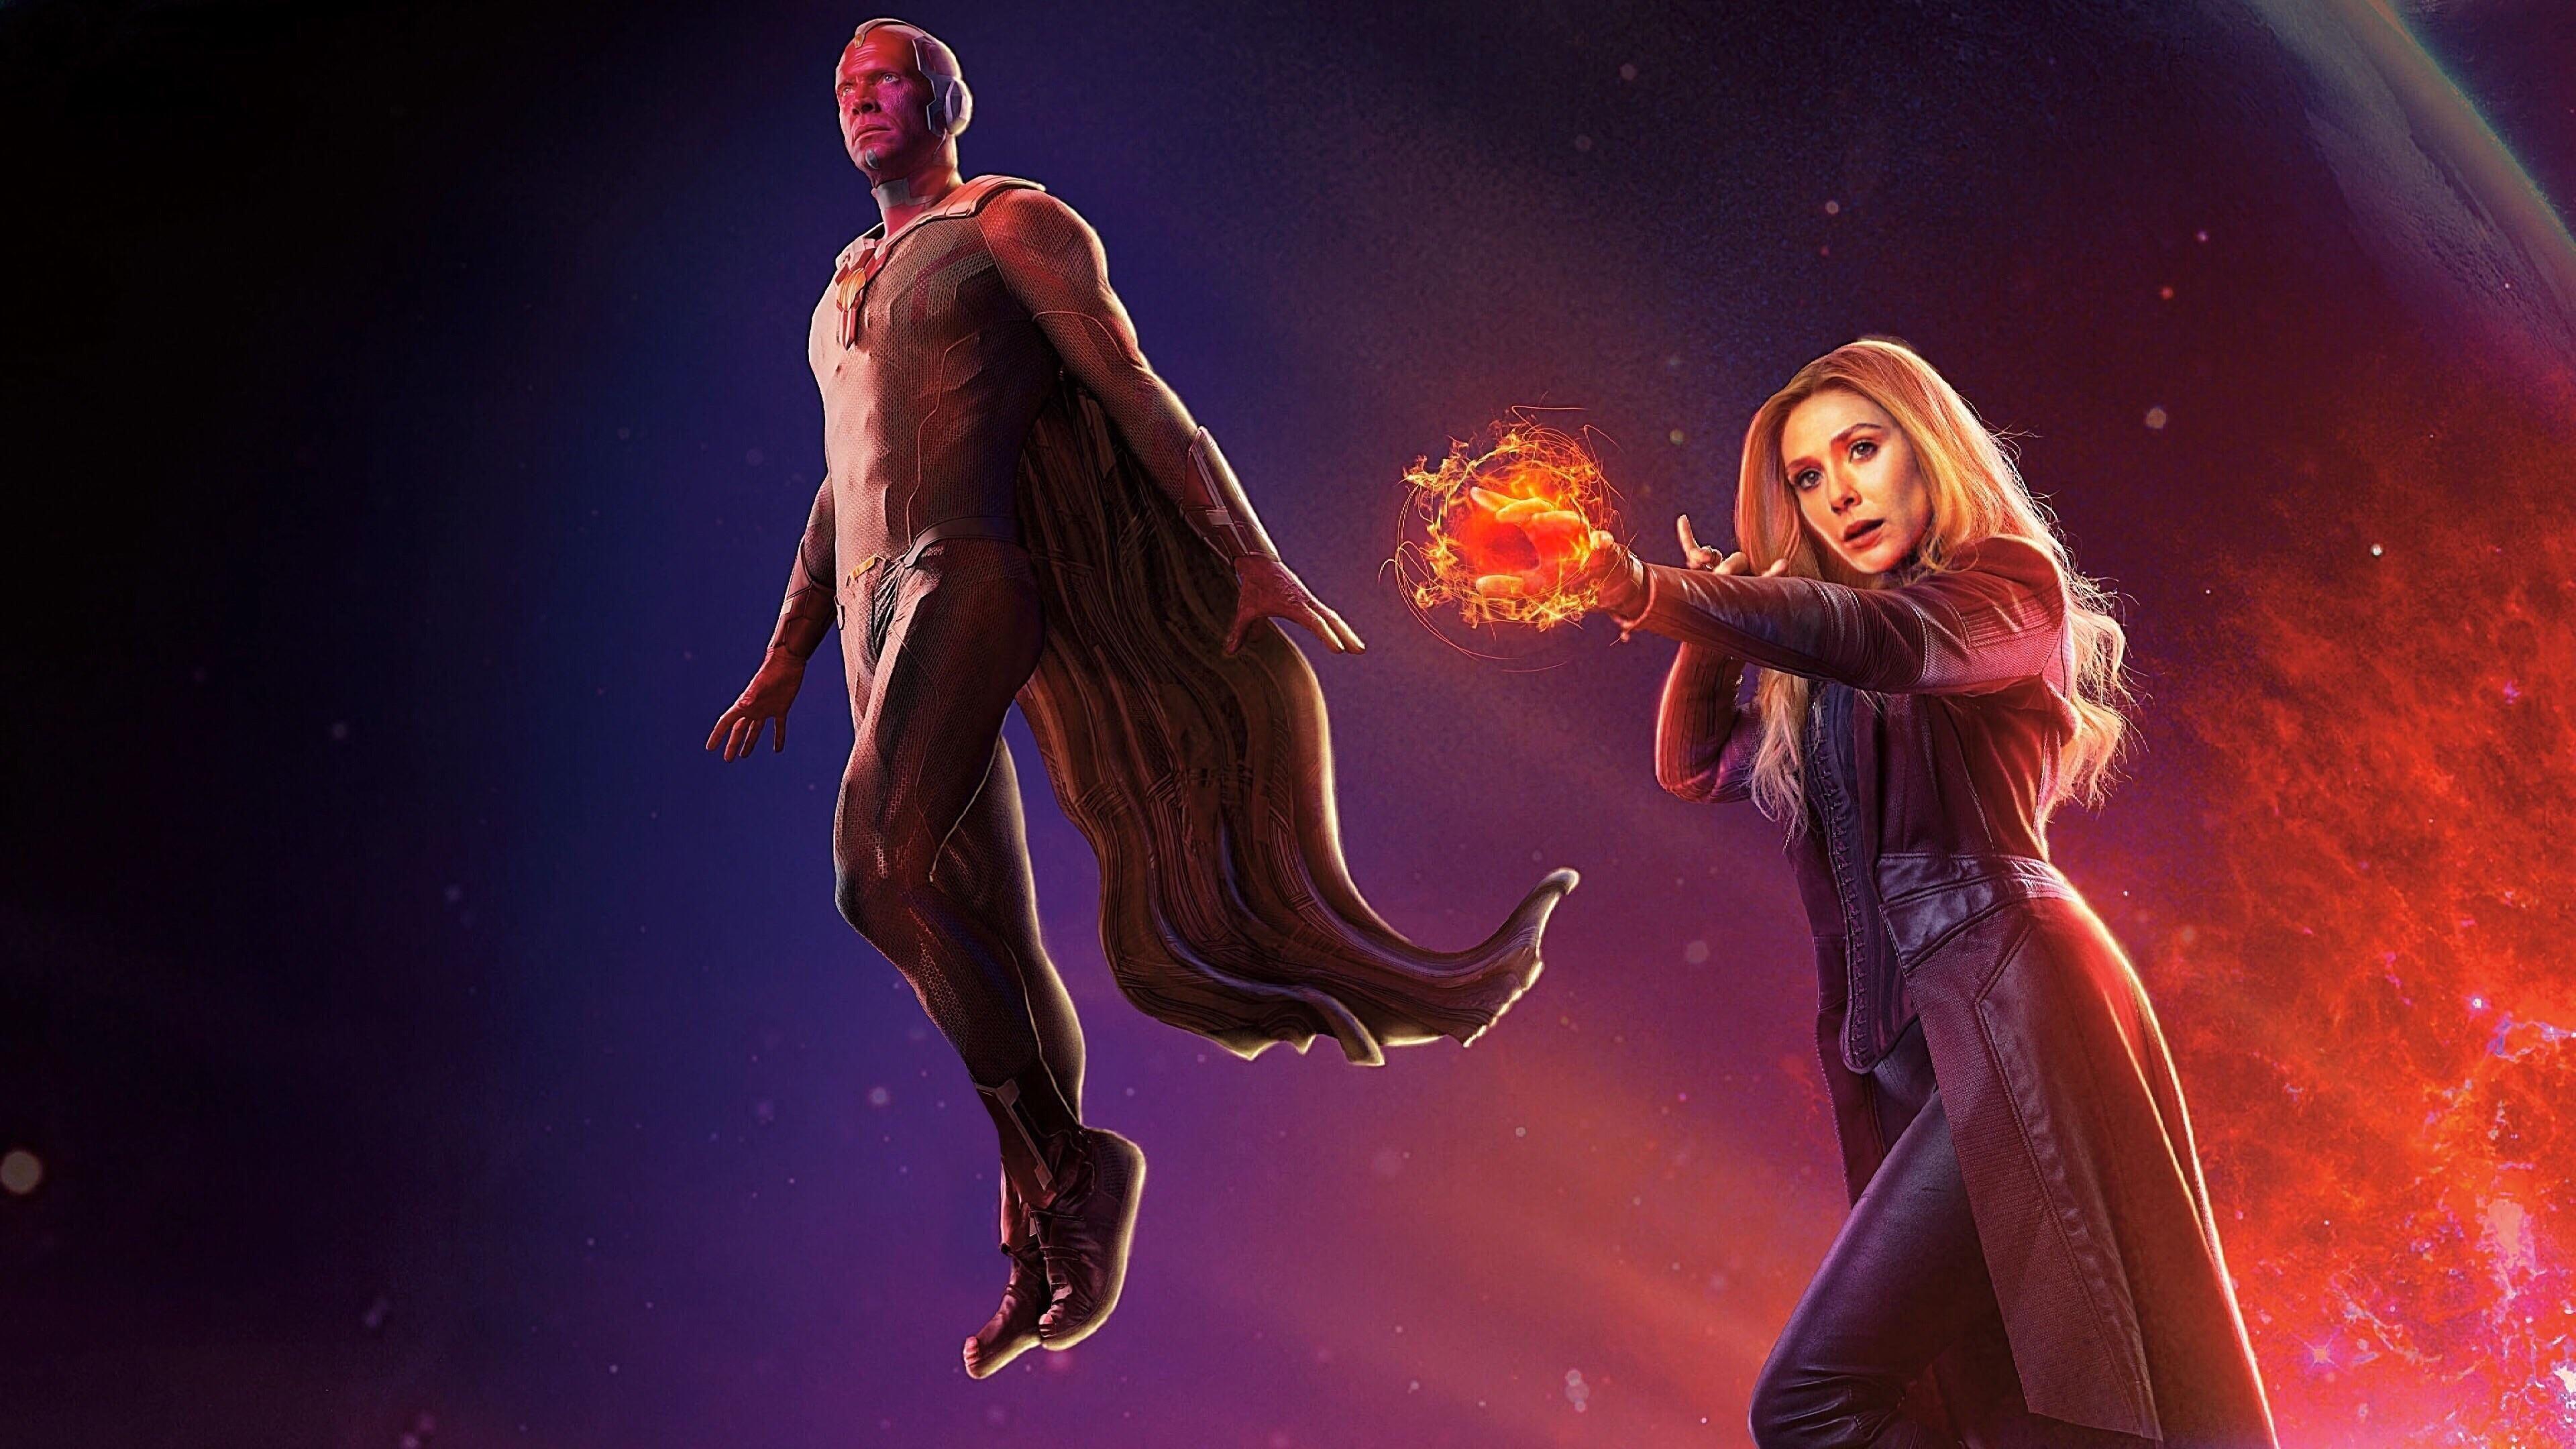 Avengers Infinity War Scarlet Witch and Vision 4k wallpaper!. Witch wallpaper, Scarlet witch, Marvel background